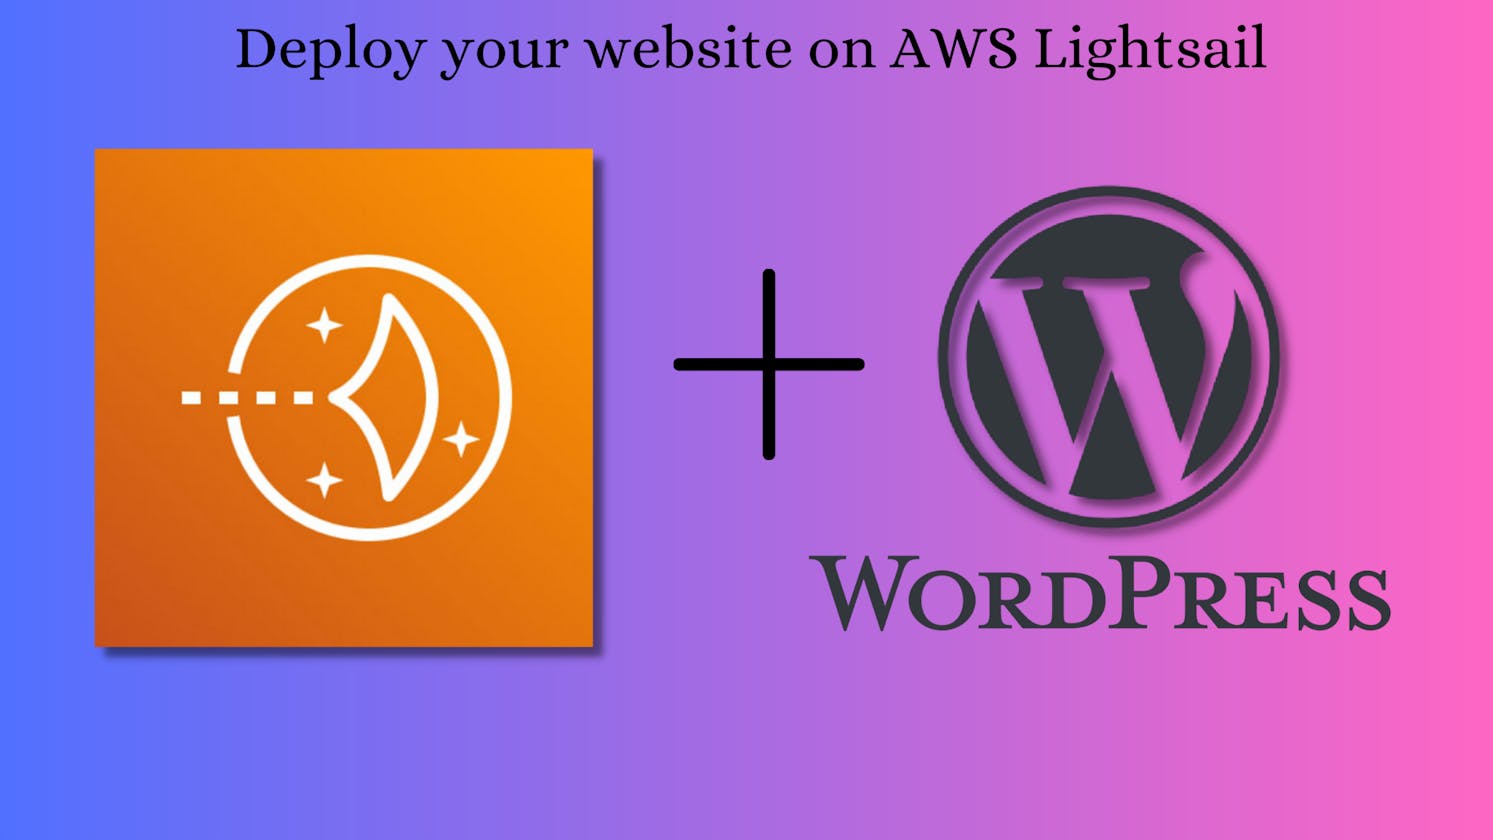 Host your WordPress website on AWS Lightsail Instance with SSL certificate.